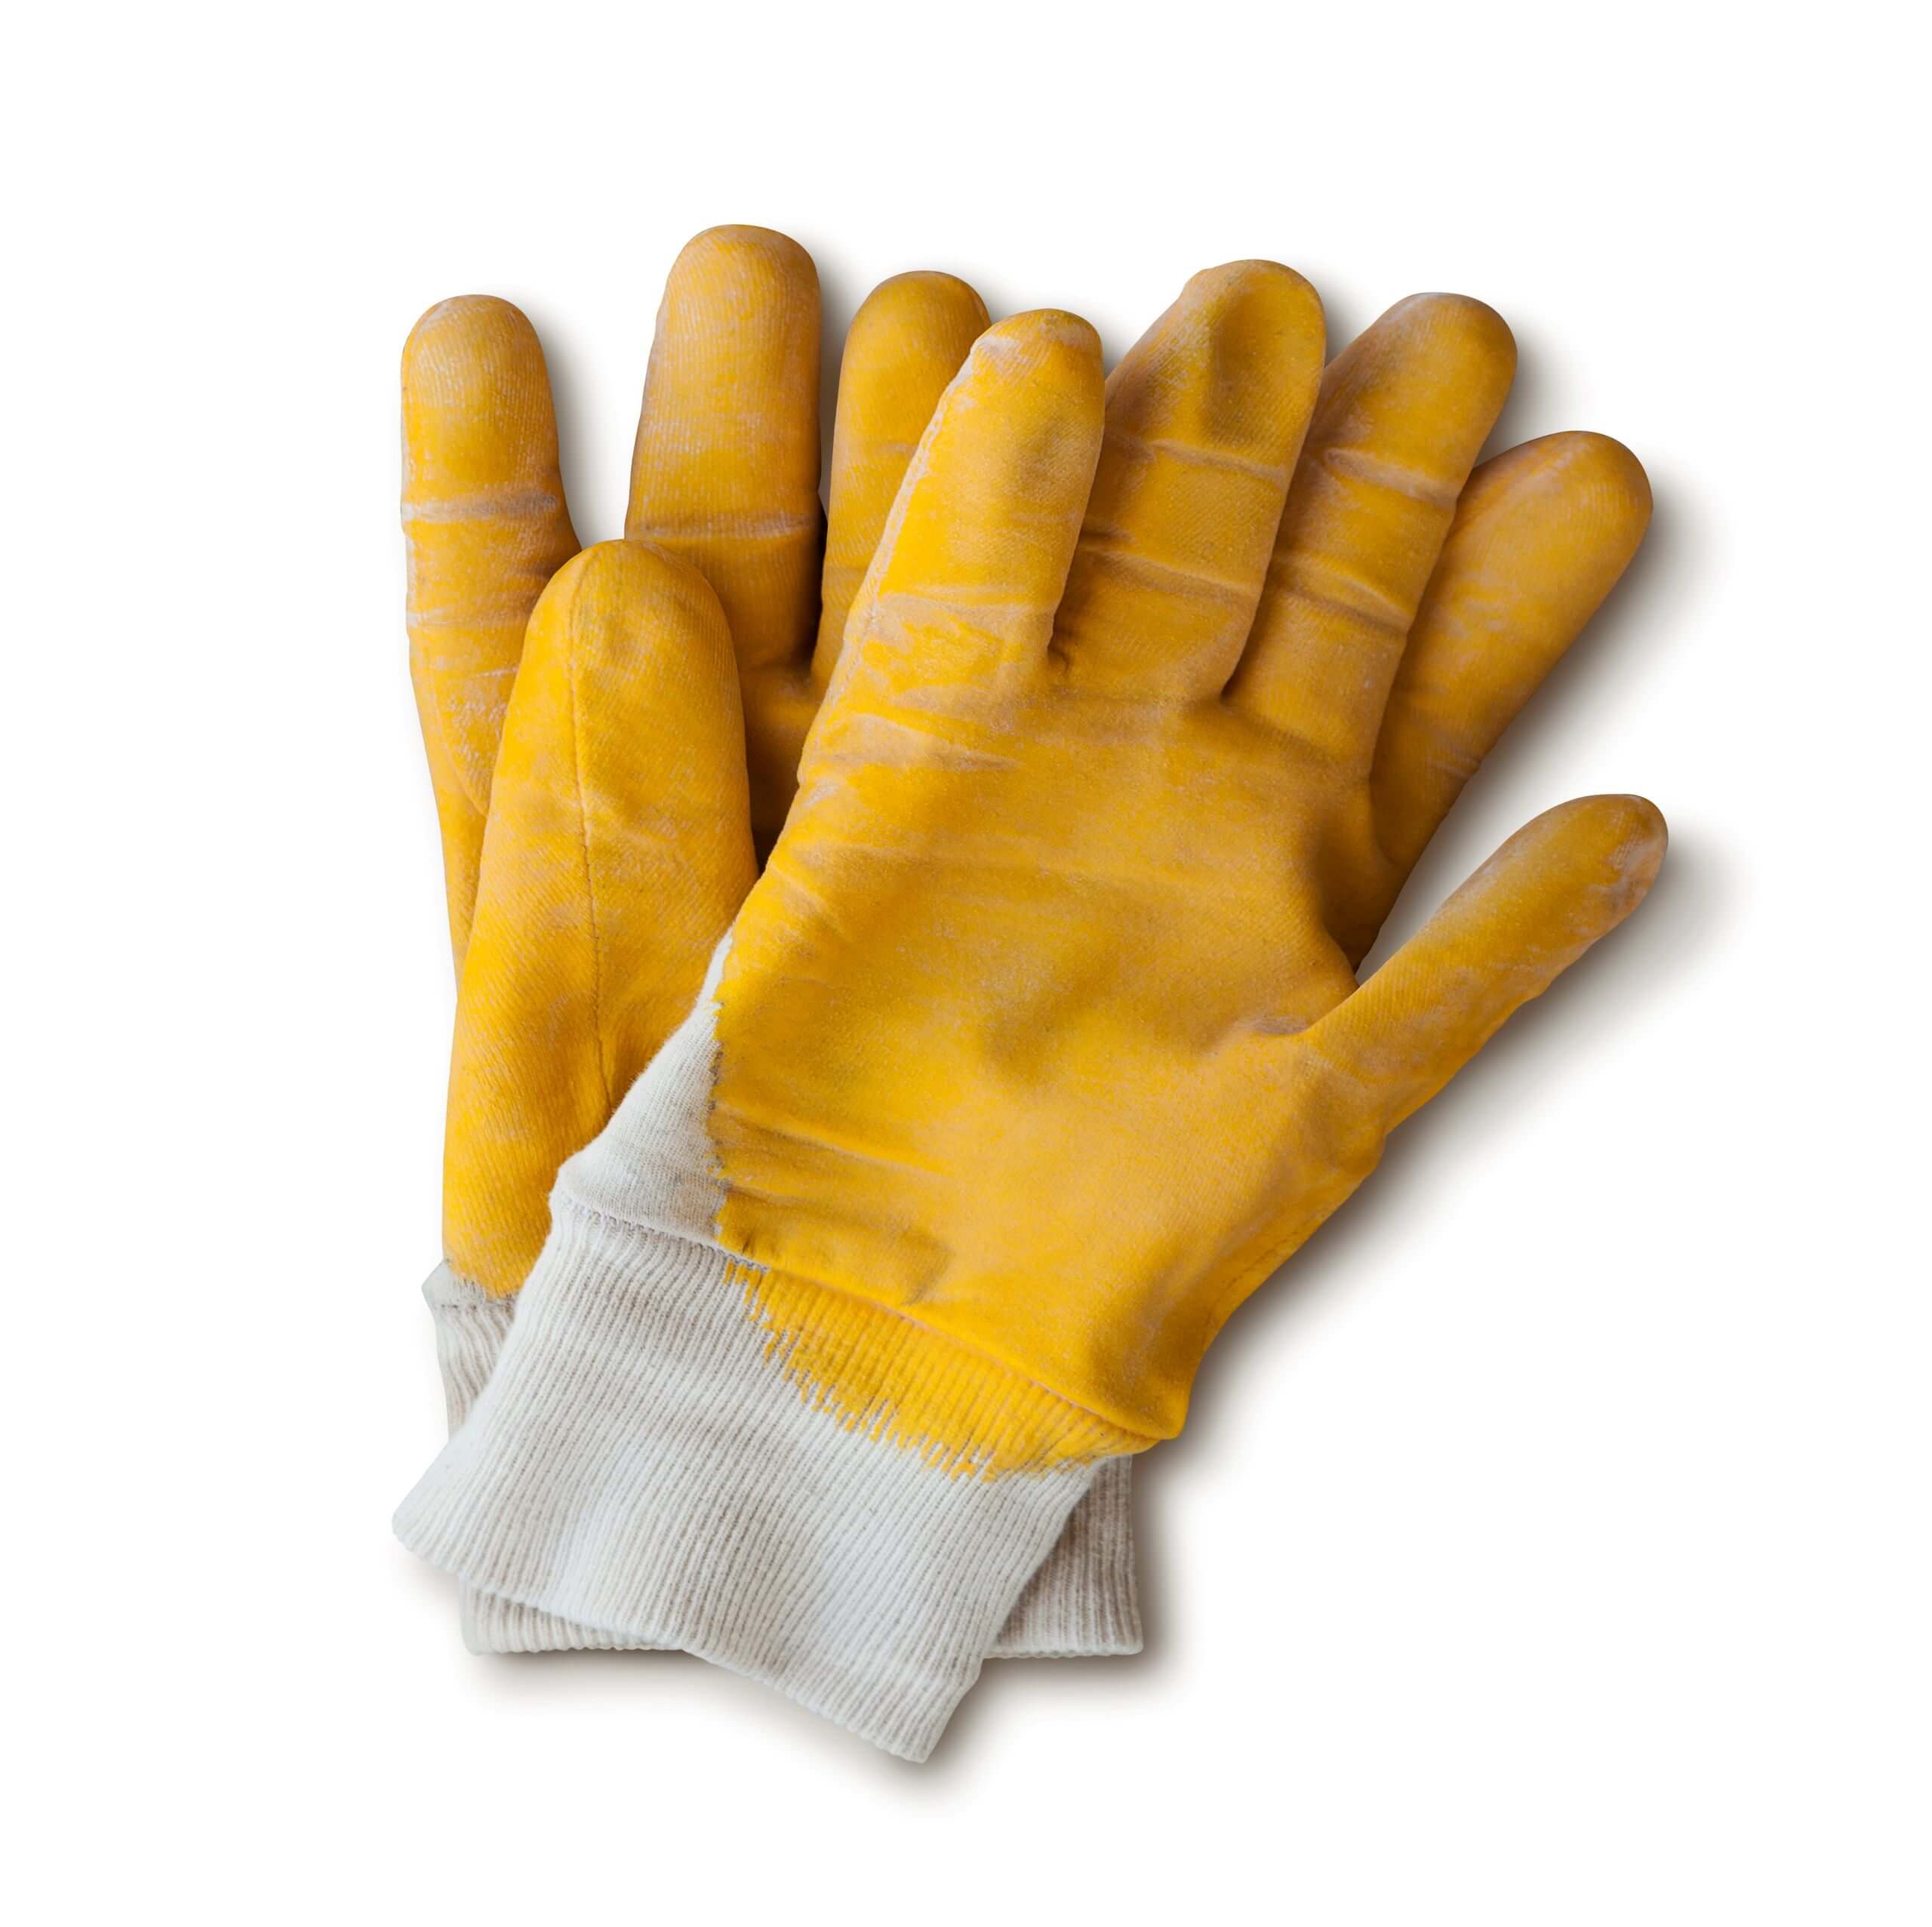 An image showing a pair of our Industrial Safety Gloves.